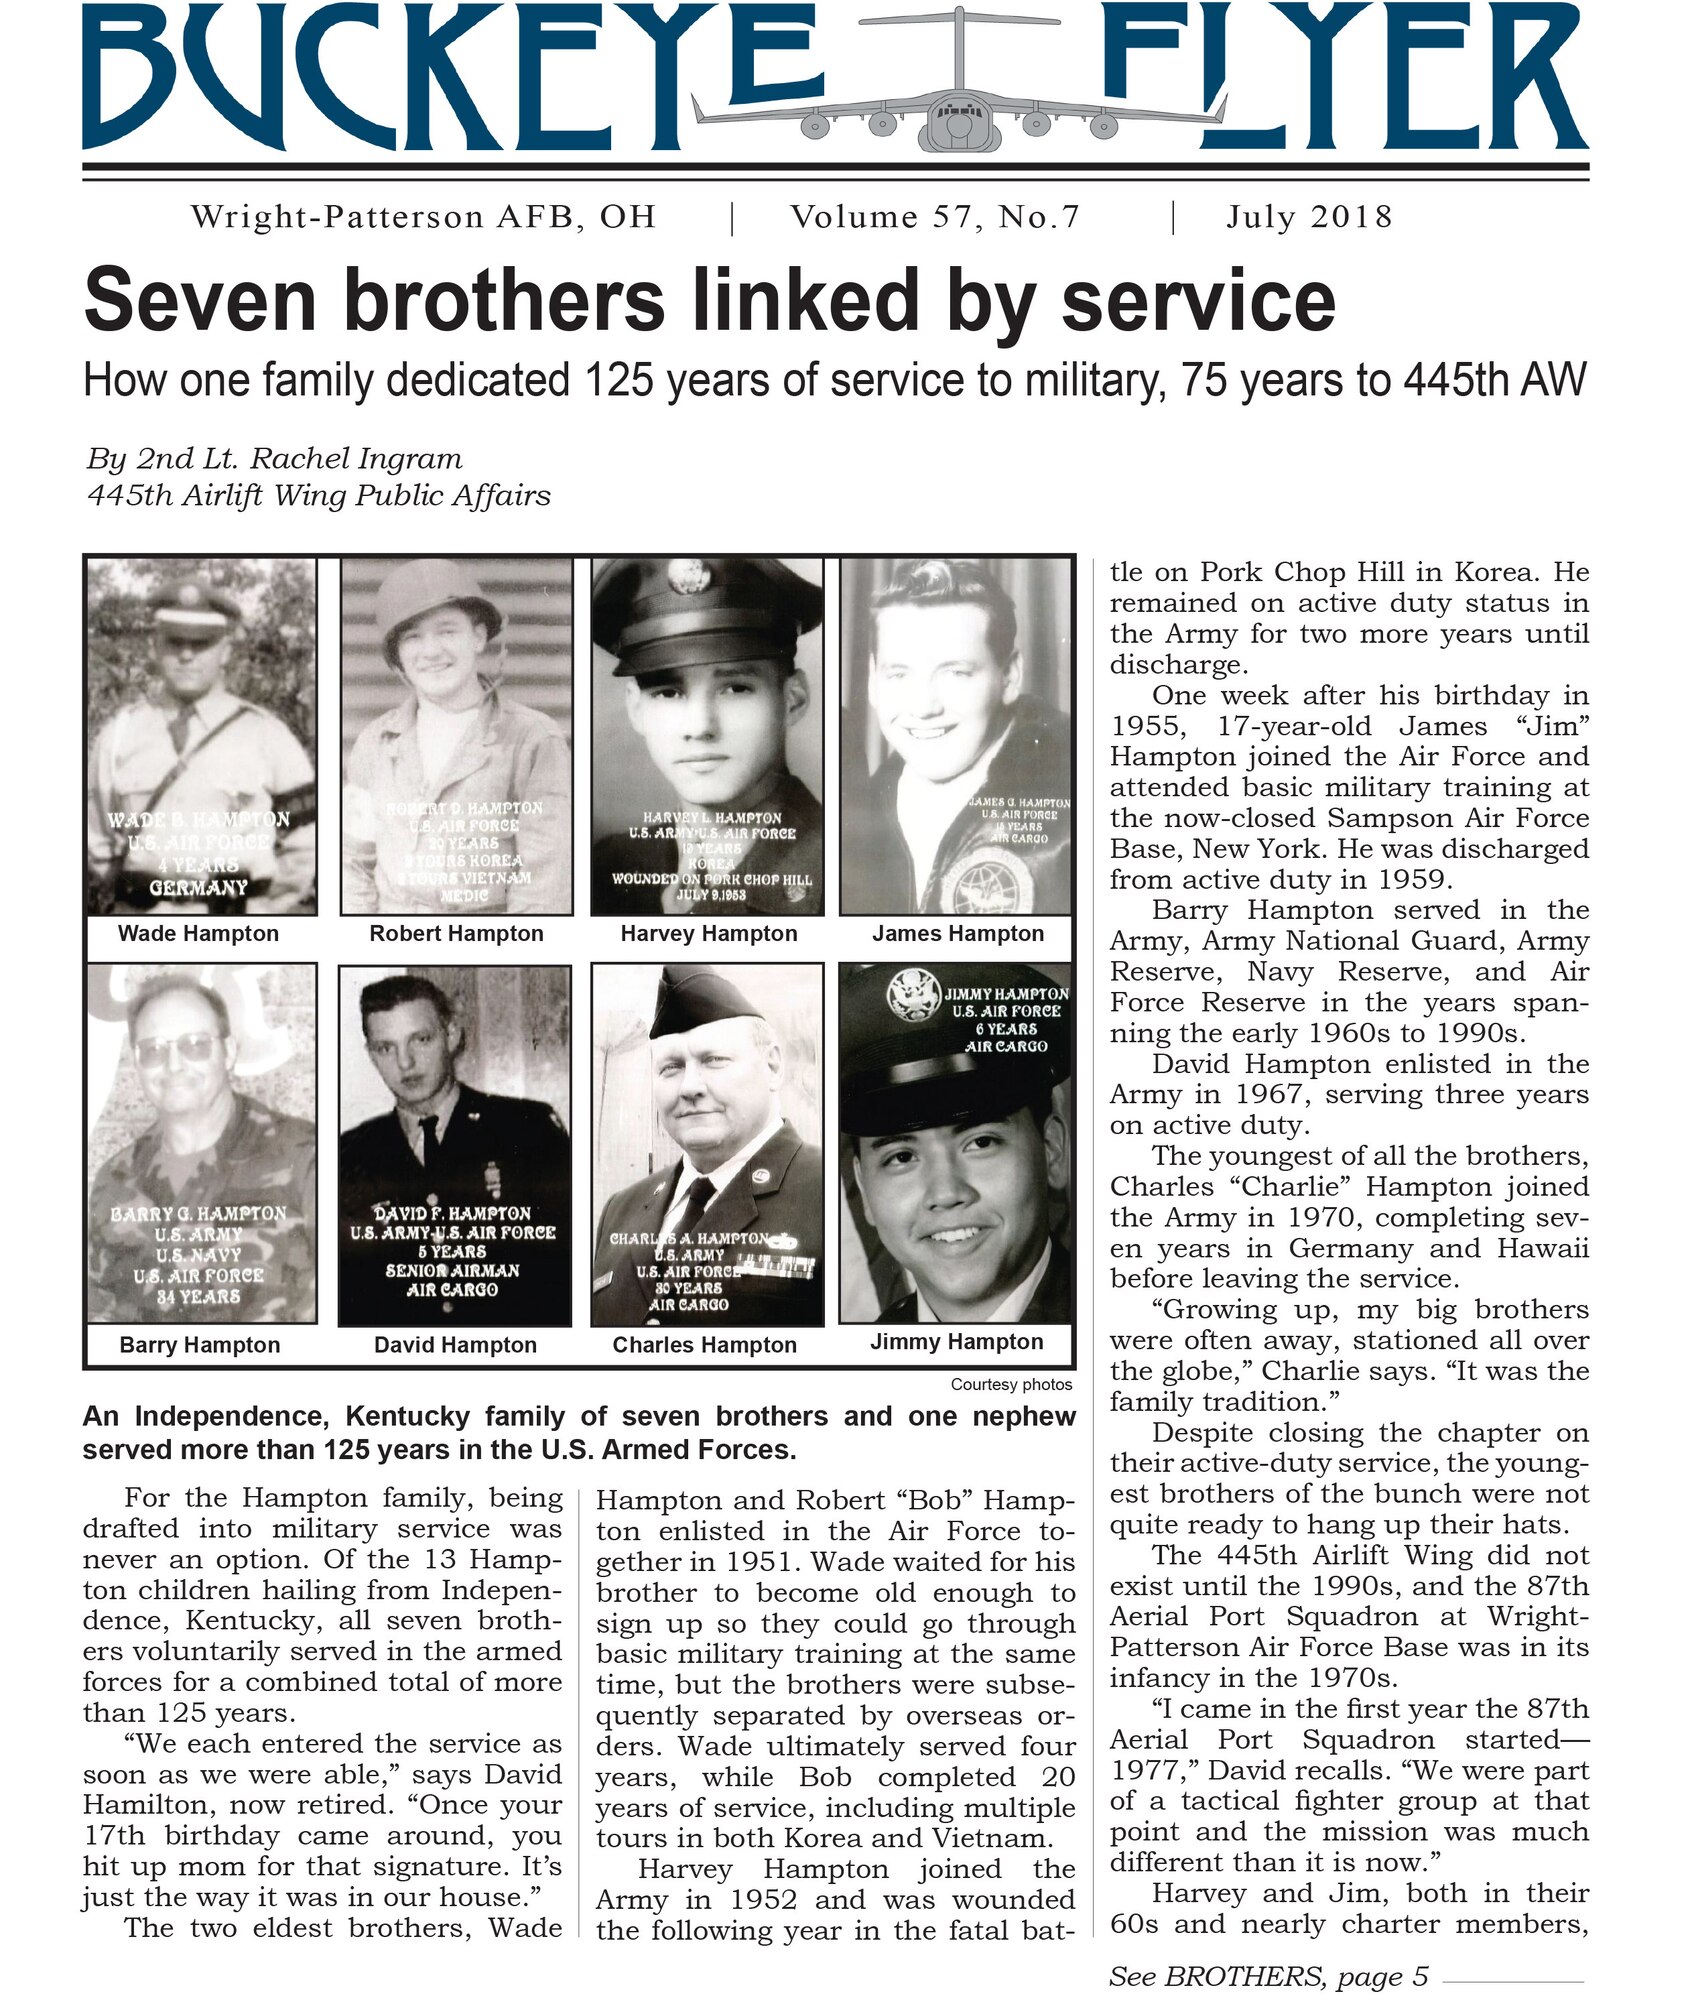 The July 2018 issue of the Buckeye Flyer is now available. The official publication of the 445th Airlift Wing includes eight pages of stories, photos and features pertaining to the 445th Airlift Wing, Air Force Reserve Command and the U.S. Air Force.